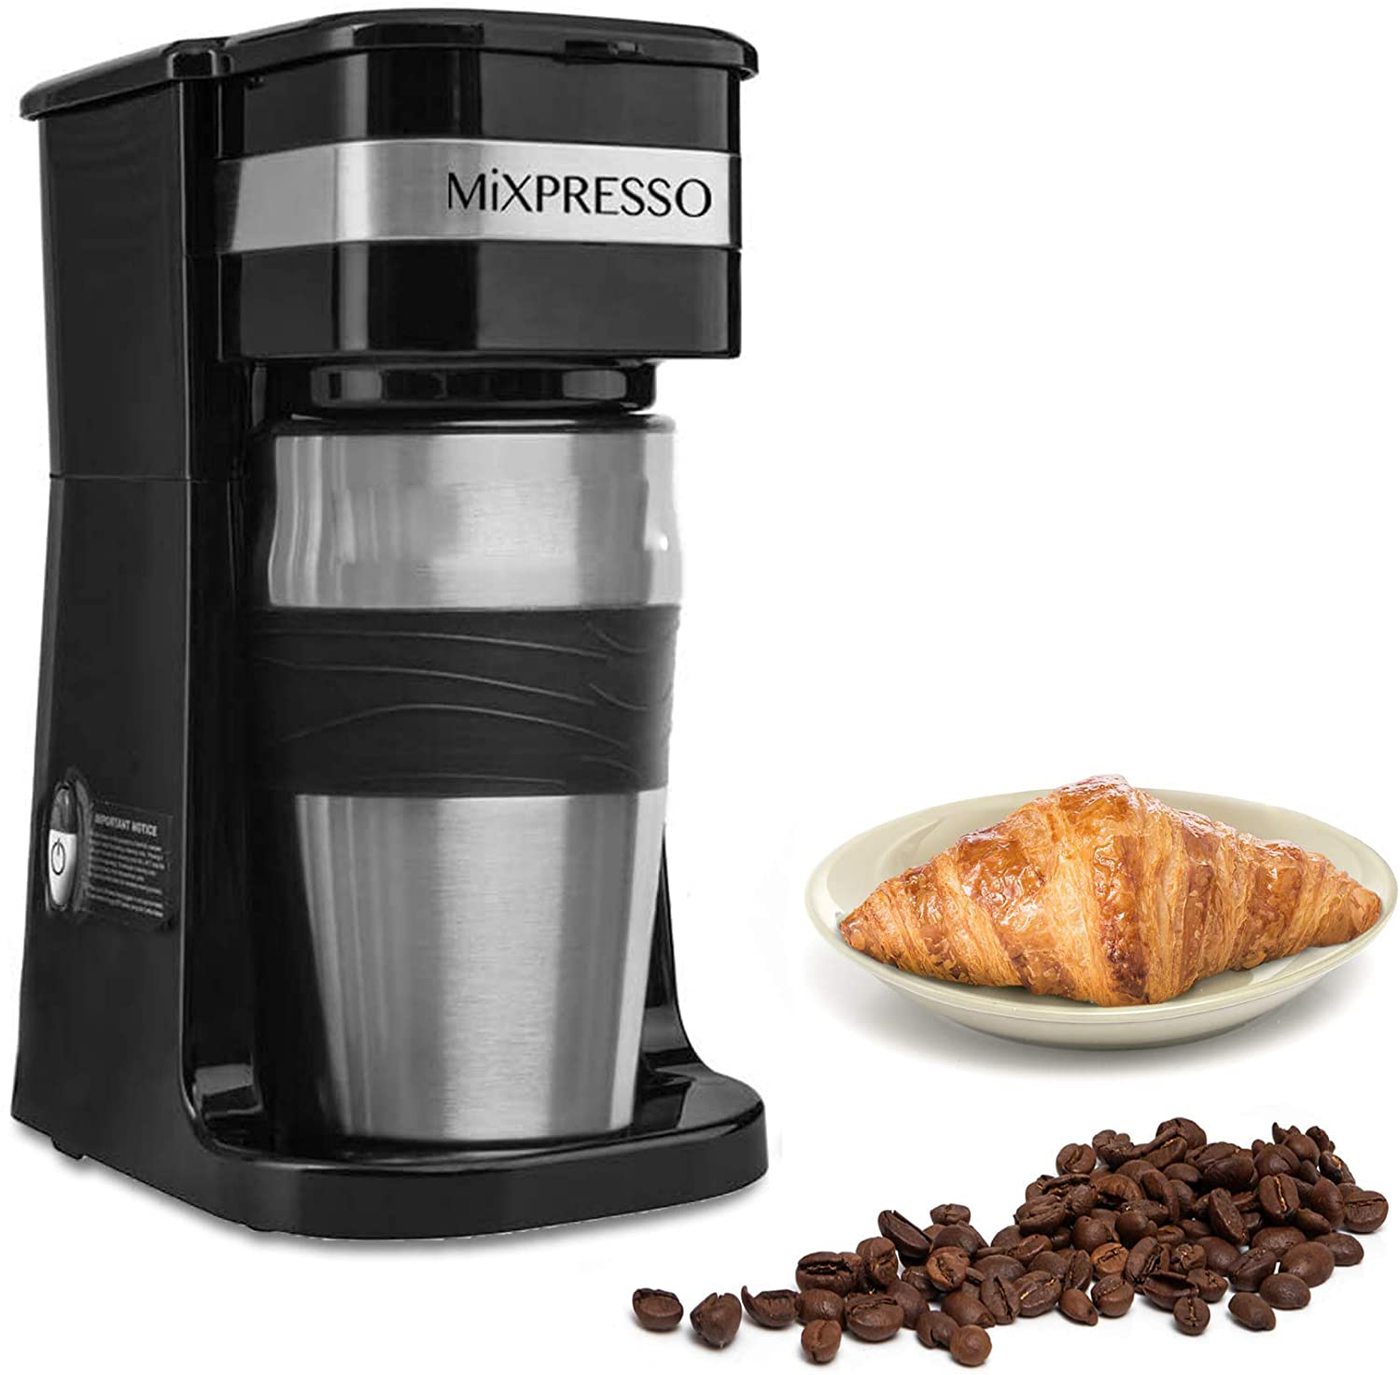 Mixpresso 2-In-1 Single Cup Coffee Maker & 14oz Travel Mug Combo | Portable & Lightweight Personal Drip Coffee Brewer & Tumbler Advanced Auto Shut Off Function & Reusable Eco-Friendly Filter